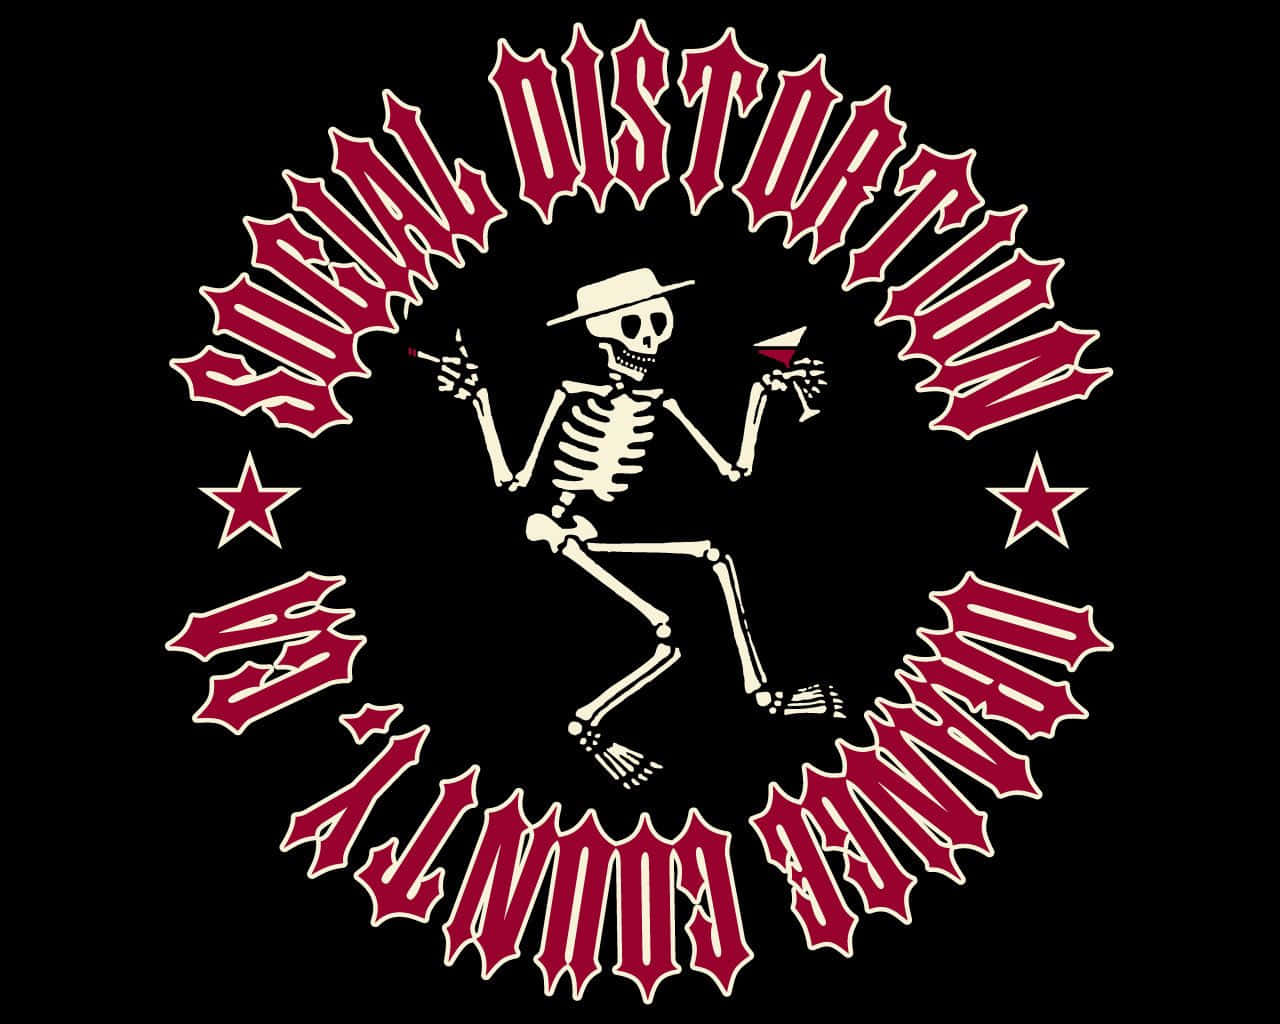 Captivating Live Performance By Social Distortion